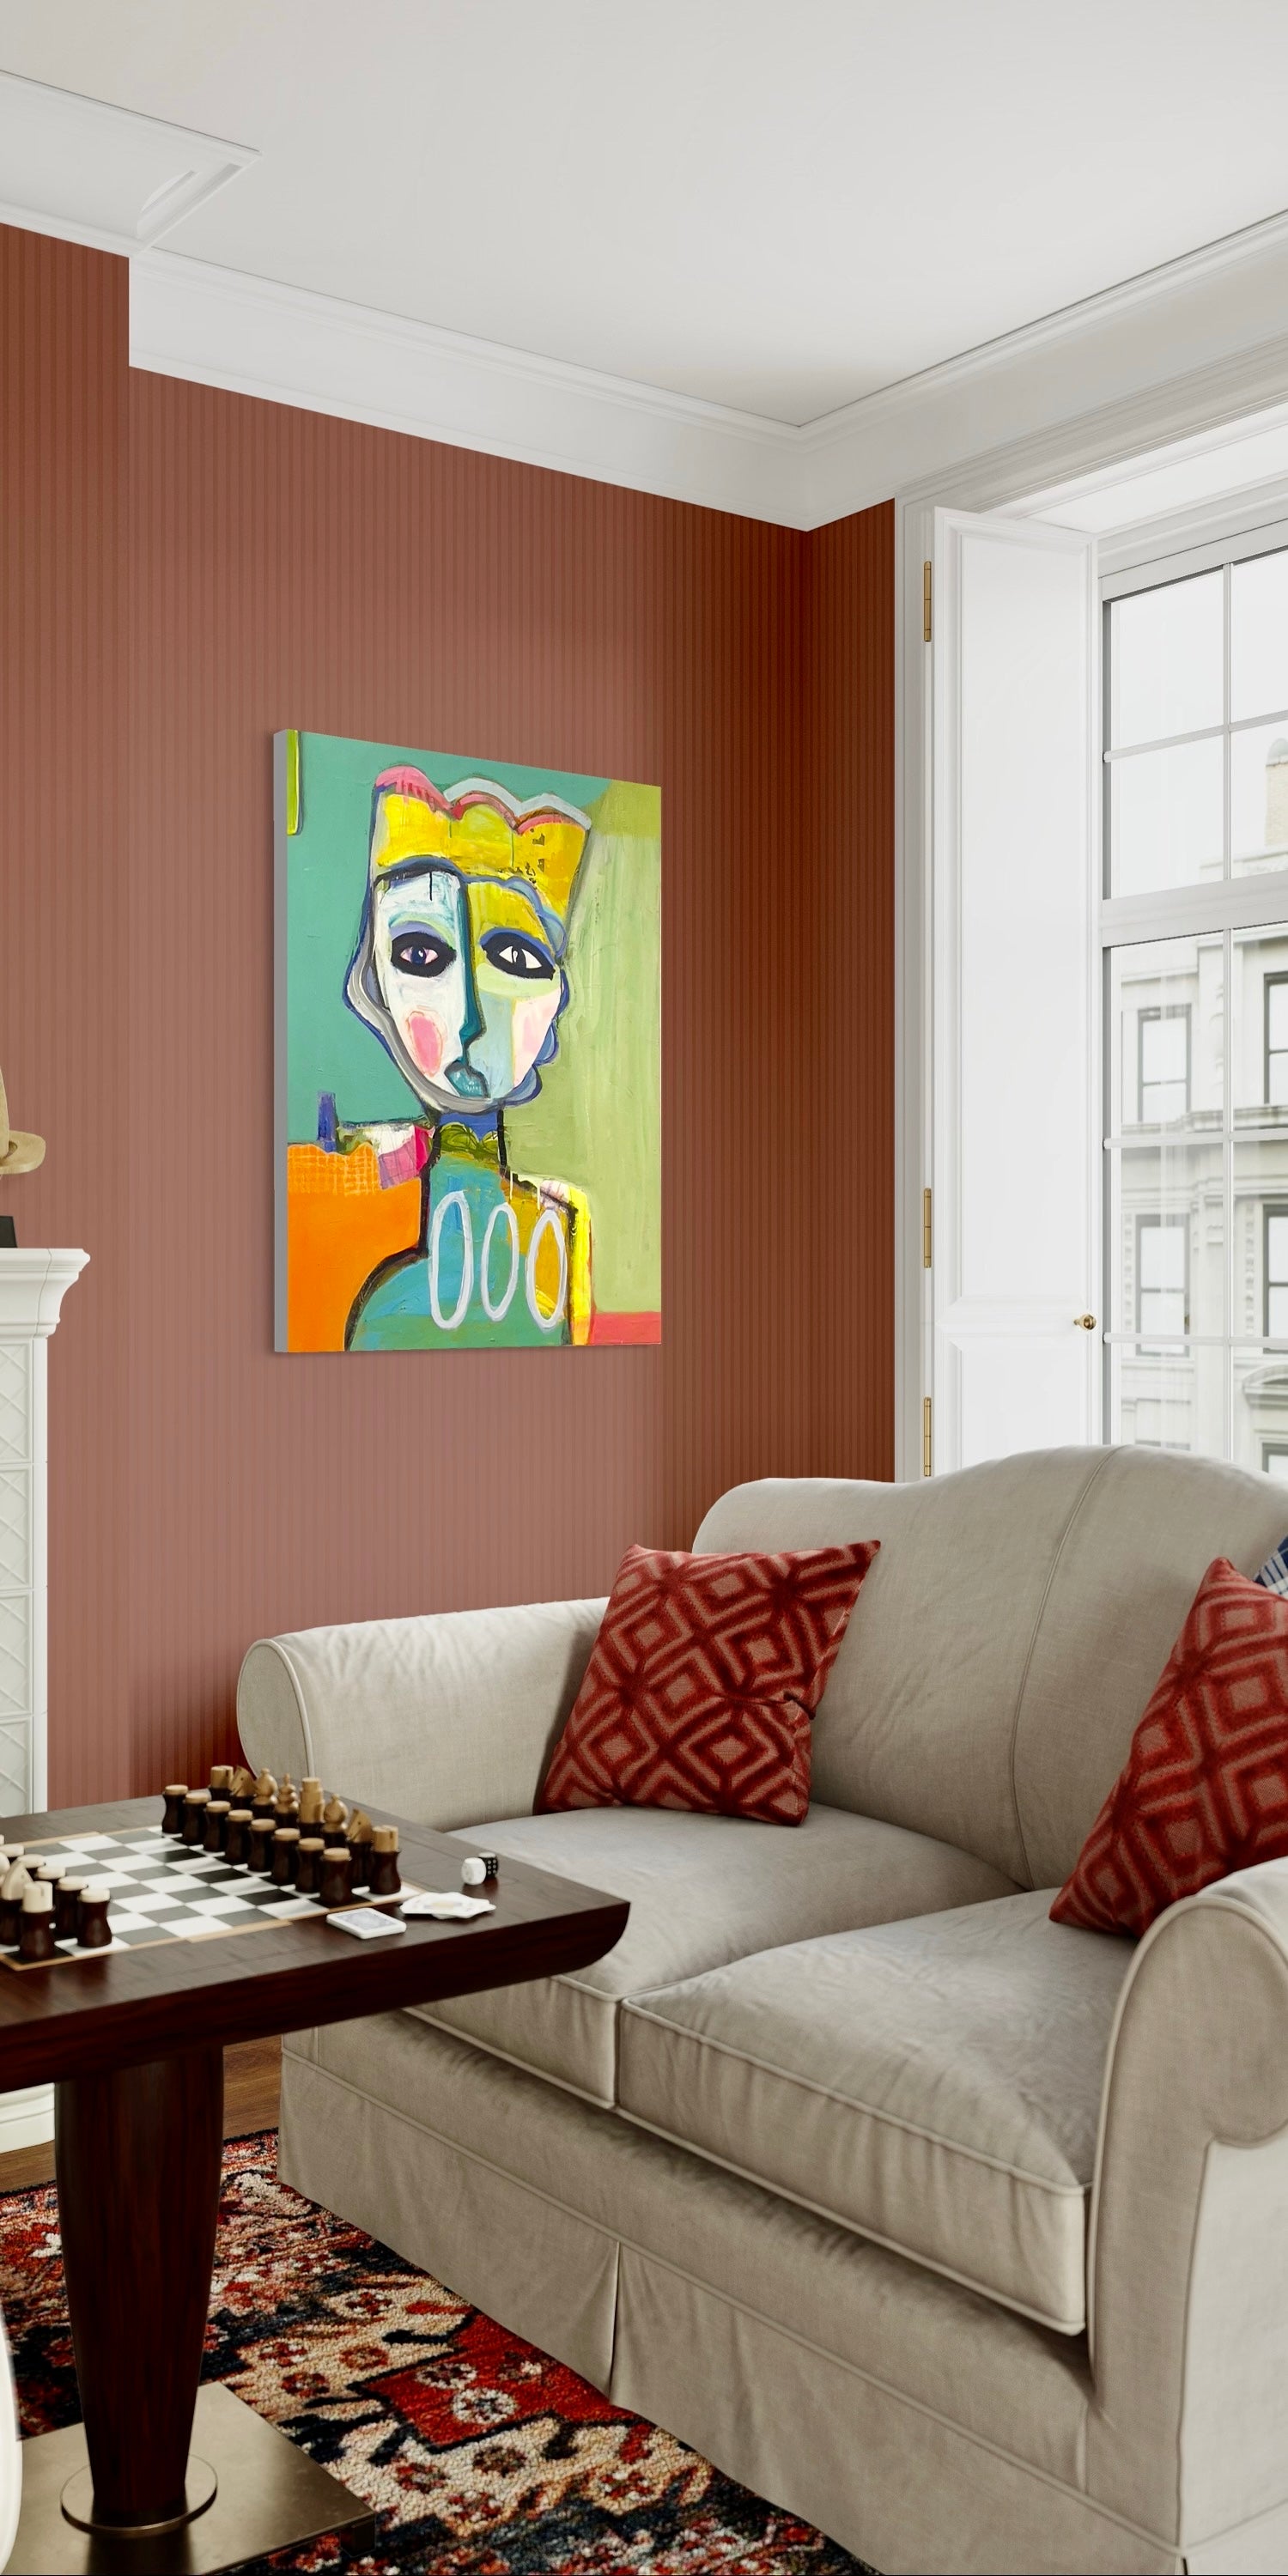 A colorful abstract portrait painting hangs in a cozy living room.